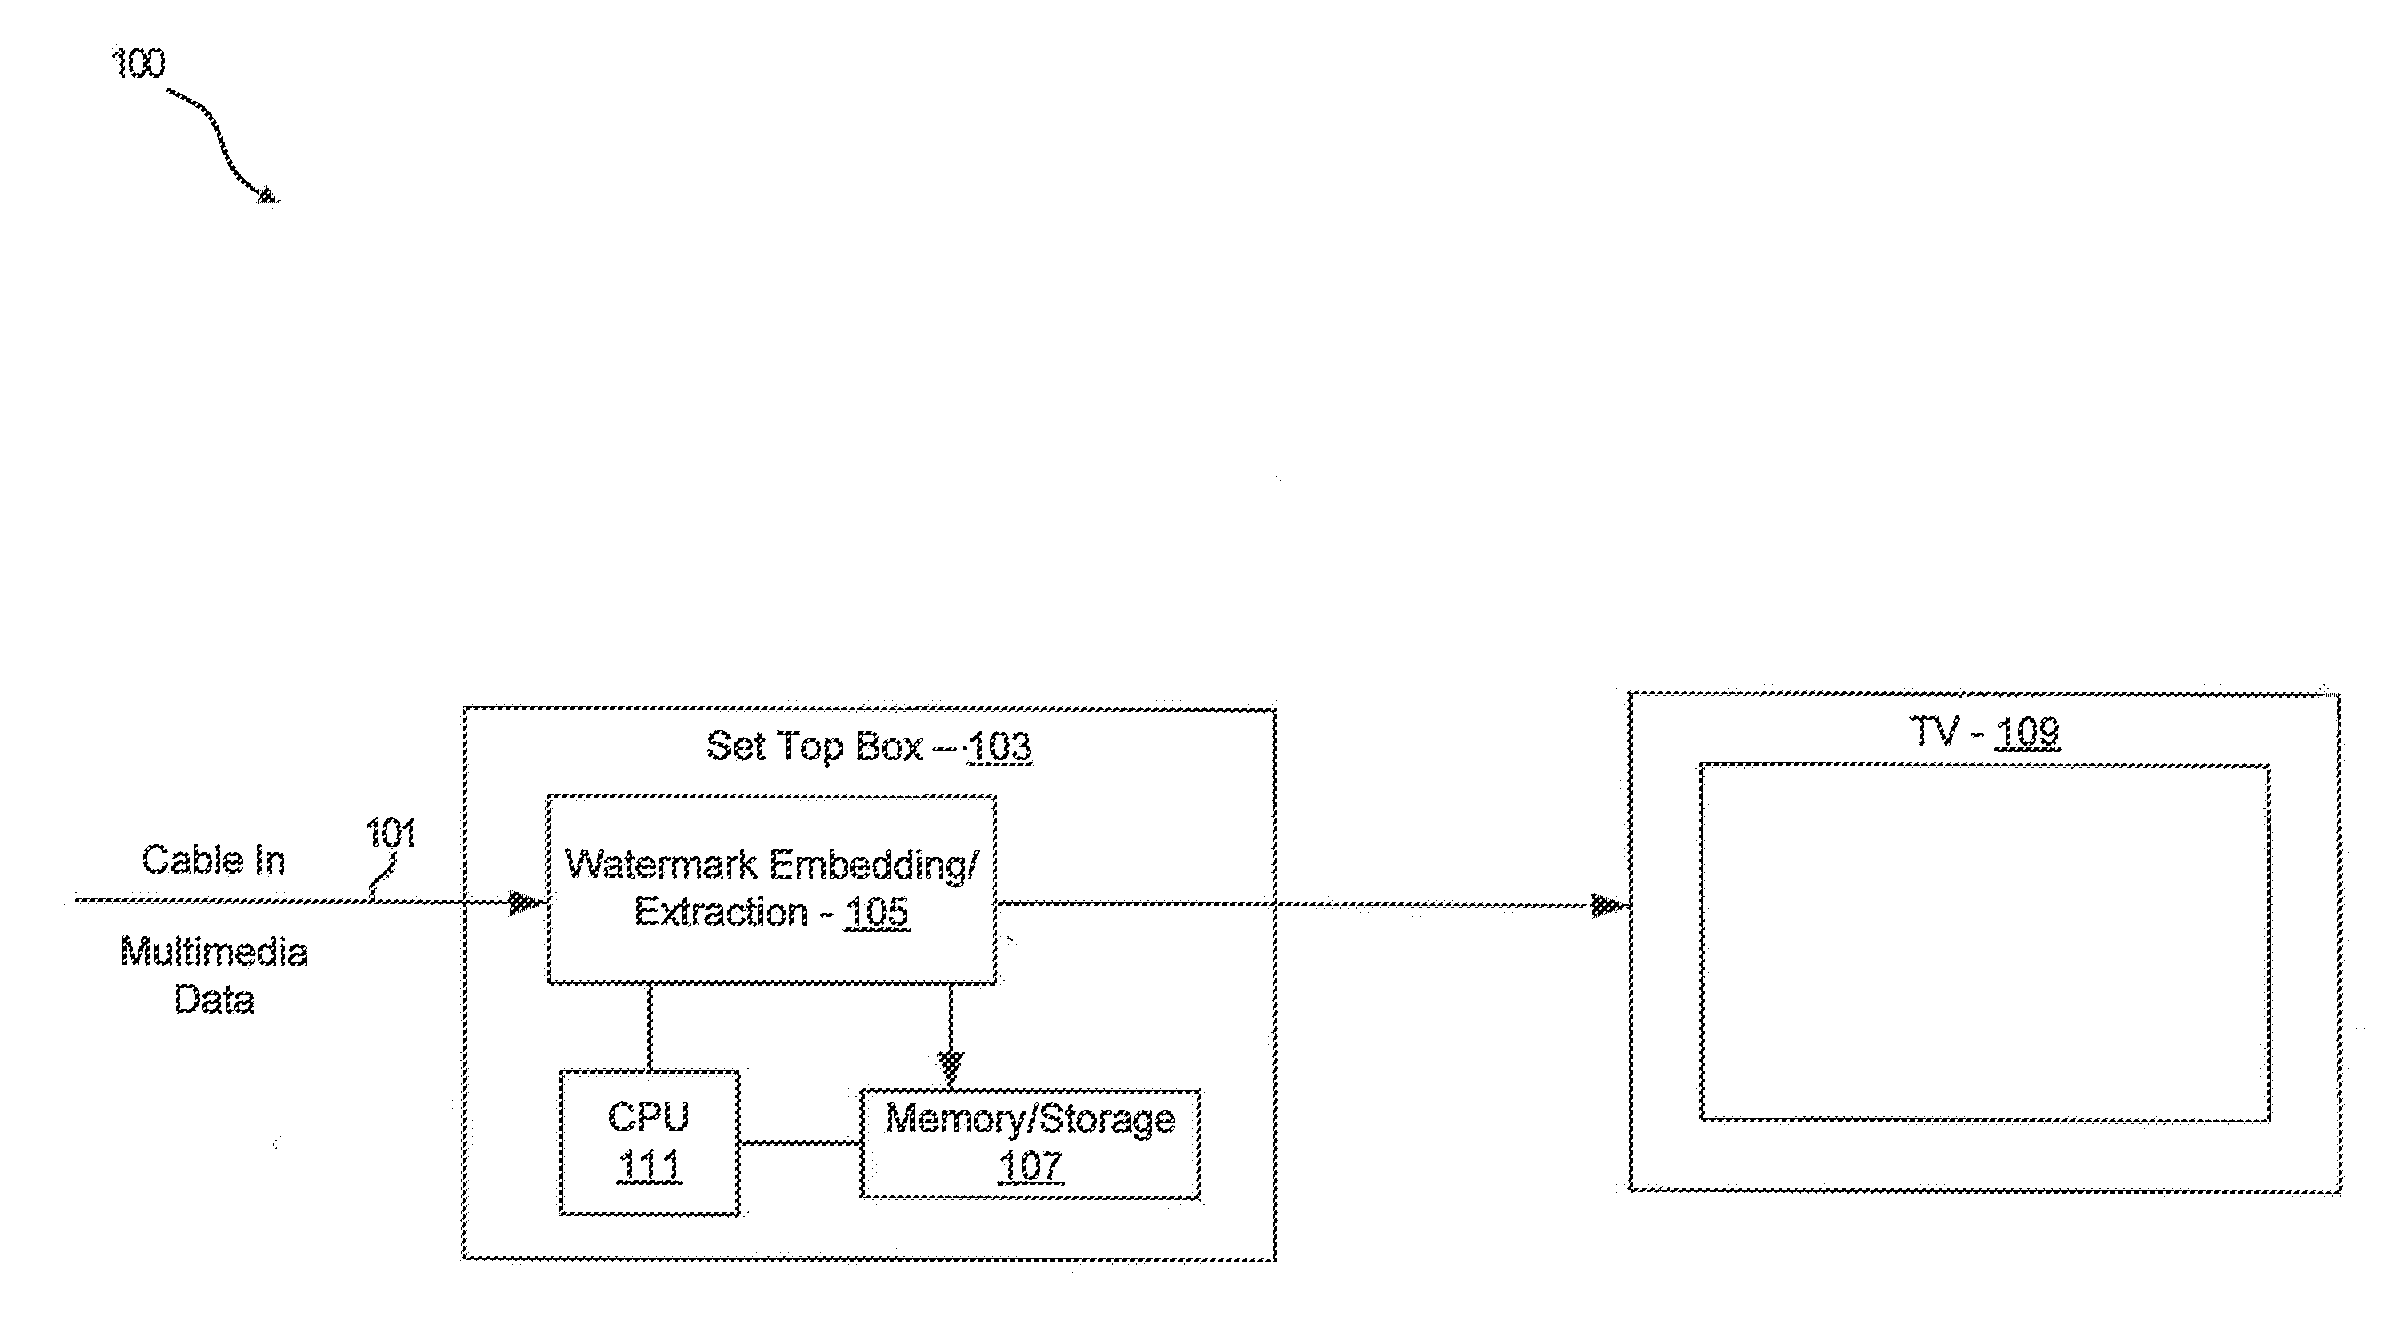 Method and System for Robust Watermark Insertion and Extraction for Digital Set-Top Boxes